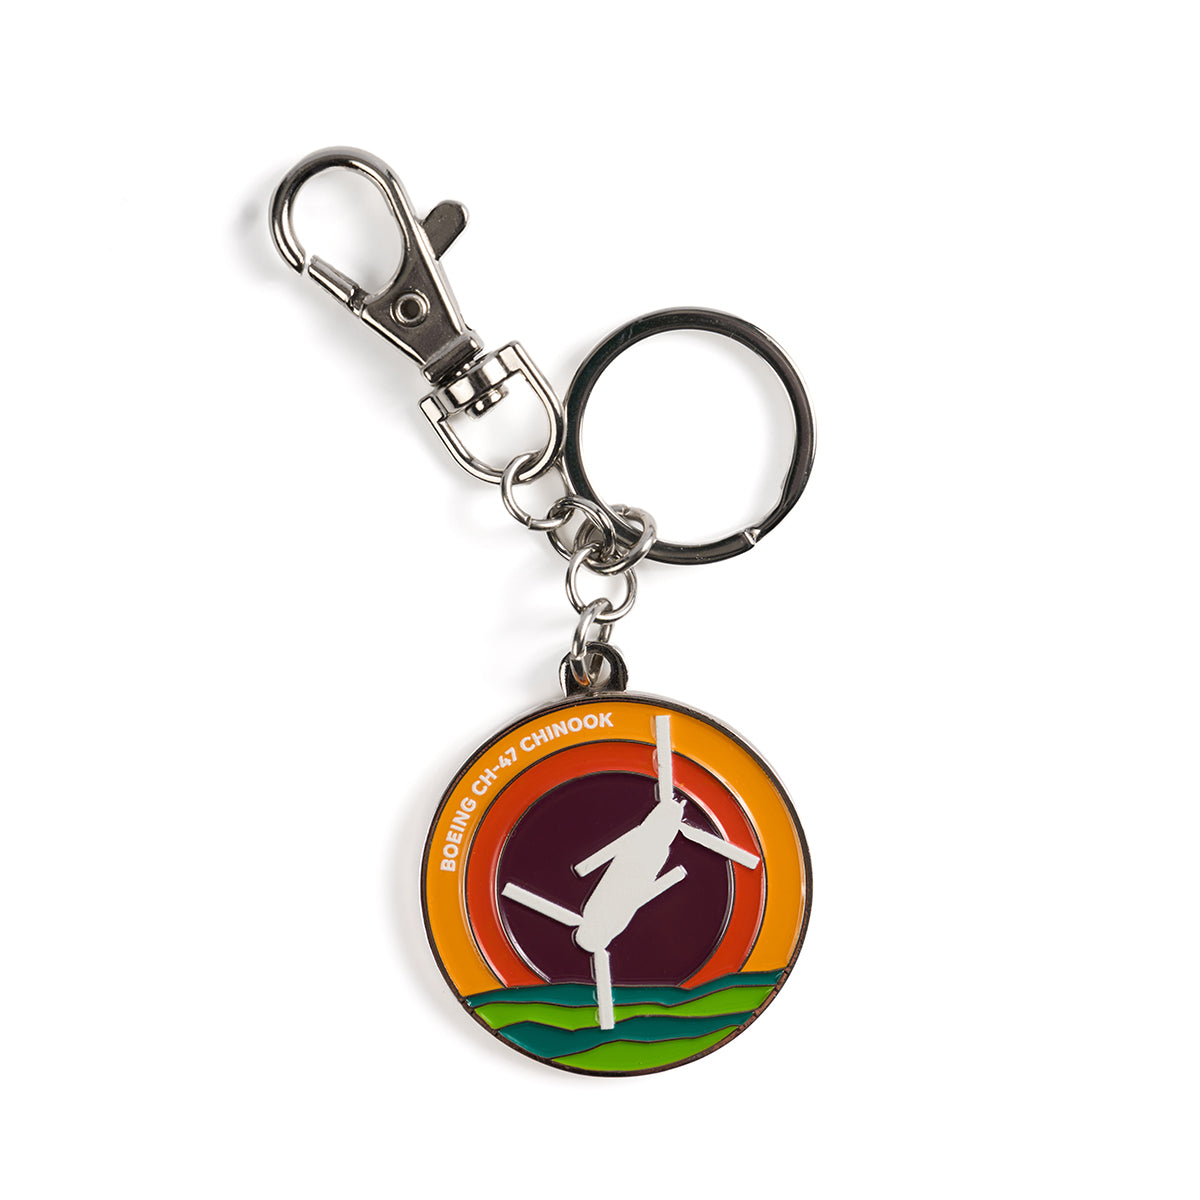  Skyward keychain, featuring the iconic Boeing CH-47 Chinook in a roundel design. 